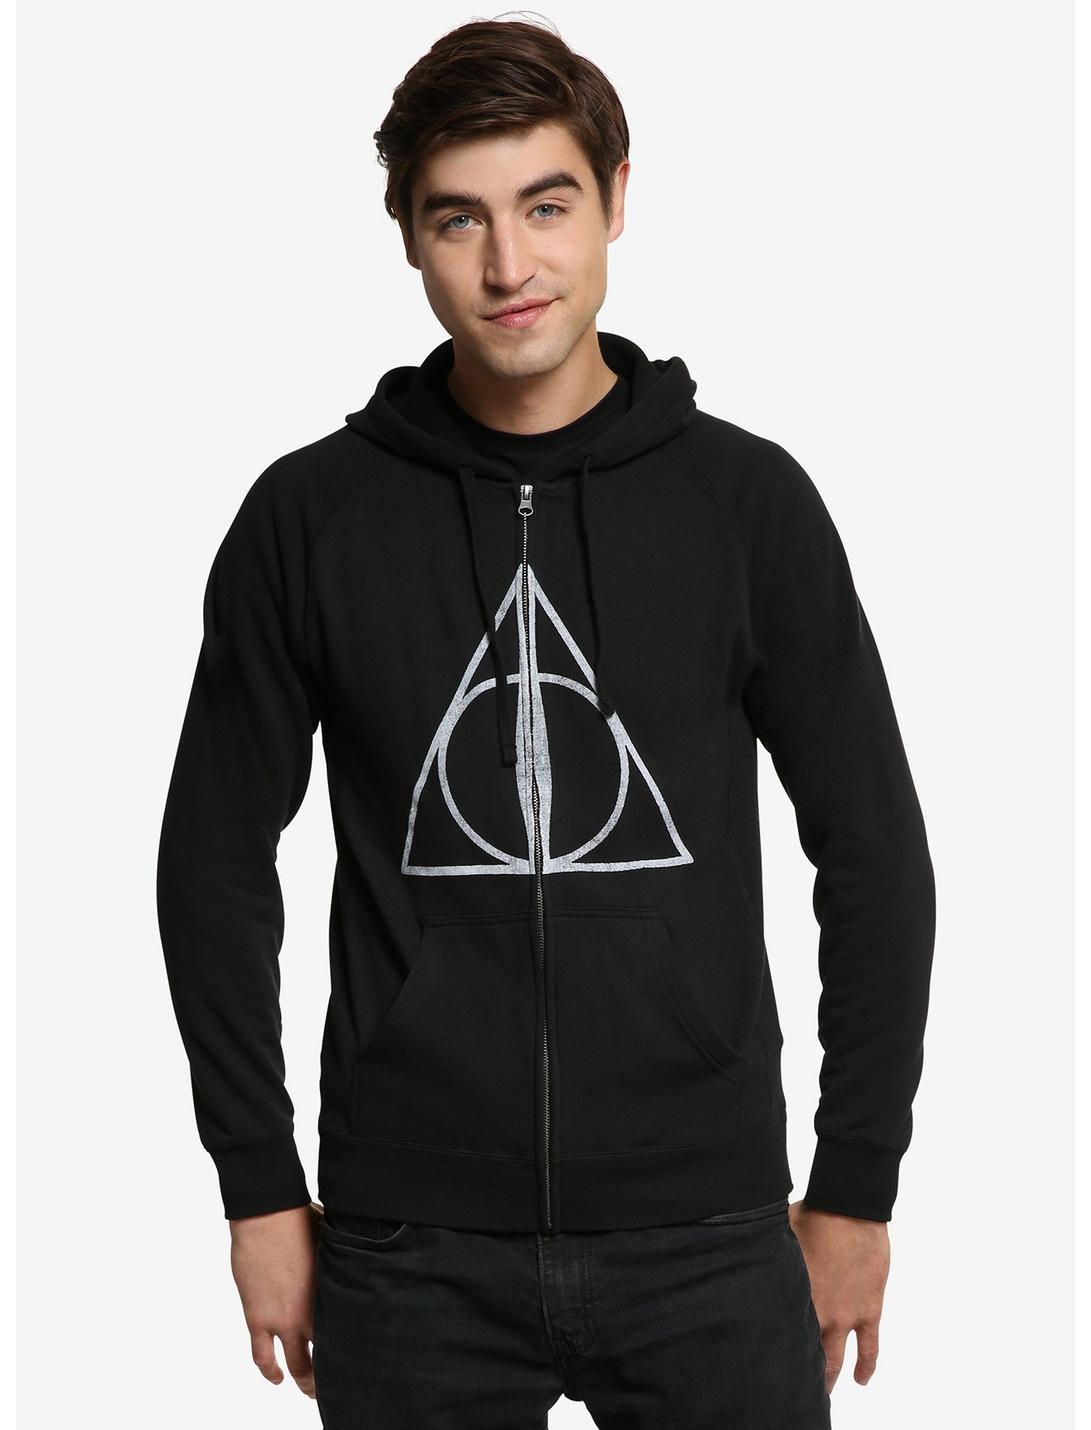 Harry Potter Sign Of The Deathly Hallows Zip Hoodie, MULTI, hi-res